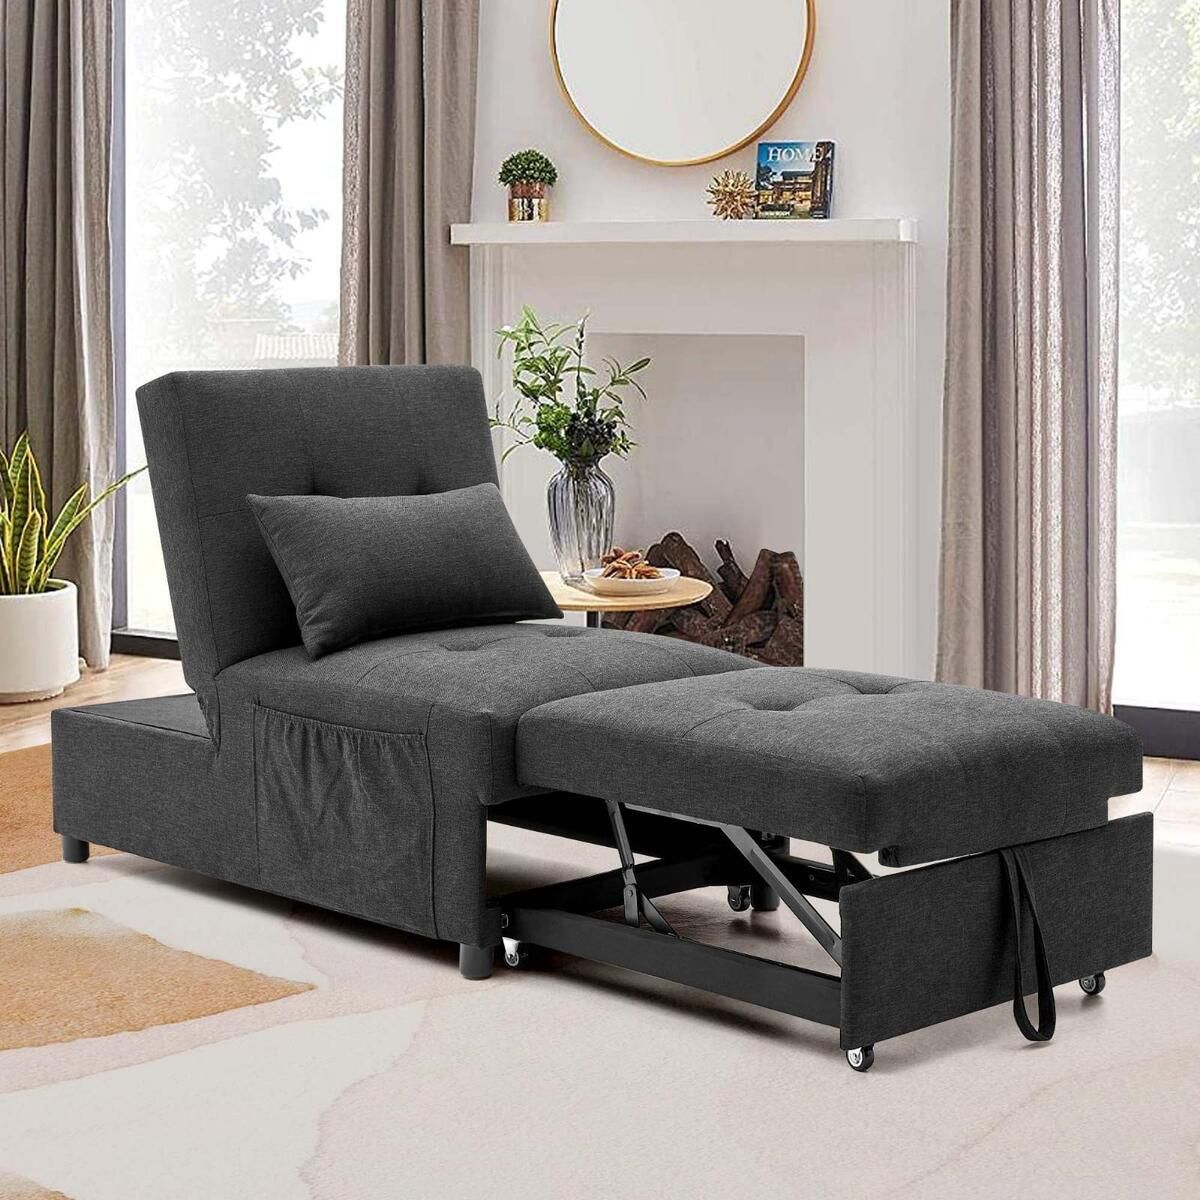 Convertible Sofa Chair Futon Bed 4 In 1 Pull Out Sleeper Chaise Home  Furniture | Ebay With Regard To 4 In 1 Convertible Sleeper Chair Beds (View 5 of 15)